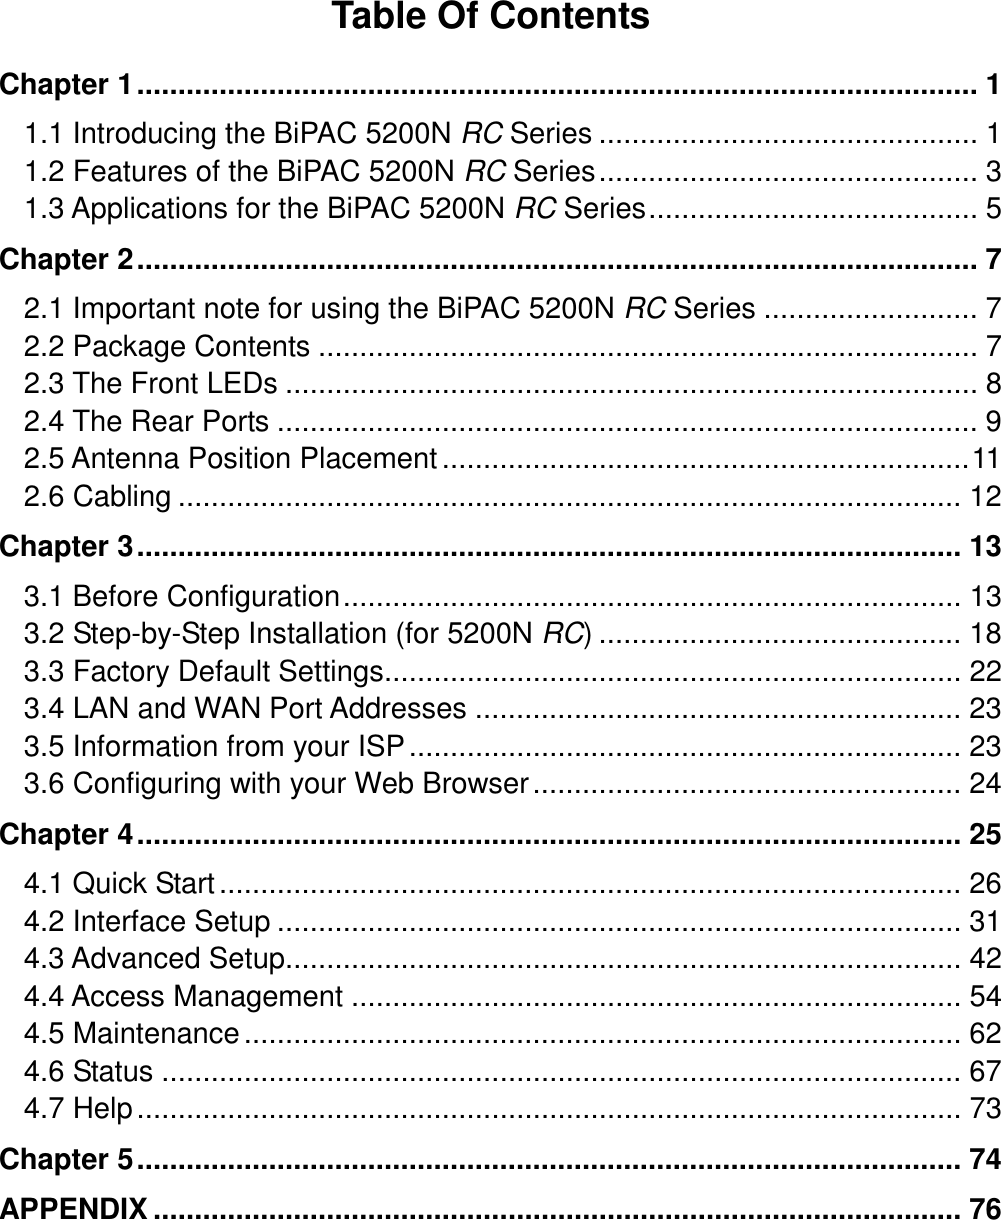  Table Of Contents  Chapter 1...................................................................................................... 1 1.1 Introducing the BiPAC 5200N RC Series .............................................. 1 1.2 Features of the BiPAC 5200N RC Series.............................................. 3 1.3 Applications for the BiPAC 5200N RC Series........................................ 5 Chapter 2...................................................................................................... 7 2.1 Important note for using the BiPAC 5200N RC Series .......................... 7 2.2 Package Contents ................................................................................ 7 2.3 The Front LEDs .................................................................................... 8 2.4 The Rear Ports ..................................................................................... 9 2.5 Antenna Position Placement................................................................11 2.6 Cabling ............................................................................................... 12 Chapter 3.................................................................................................... 13 3.1 Before Configuration........................................................................... 13 3.2 Step-by-Step Installation (for 5200N RC) ............................................ 18 3.3 Factory Default Settings...................................................................... 22 3.4 LAN and WAN Port Addresses ........................................................... 23 3.5 Information from your ISP................................................................... 23 3.6 Configuring with your Web Browser.................................................... 24 Chapter 4.................................................................................................... 25 4.1 Quick Start.......................................................................................... 26 4.2 Interface Setup ................................................................................... 31 4.3 Advanced Setup.................................................................................. 42 4.4 Access Management .......................................................................... 54 4.5 Maintenance....................................................................................... 62 4.6 Status ................................................................................................. 67 4.7 Help.................................................................................................... 73 Chapter 5.................................................................................................... 74 APPENDIX .................................................................................................. 76 